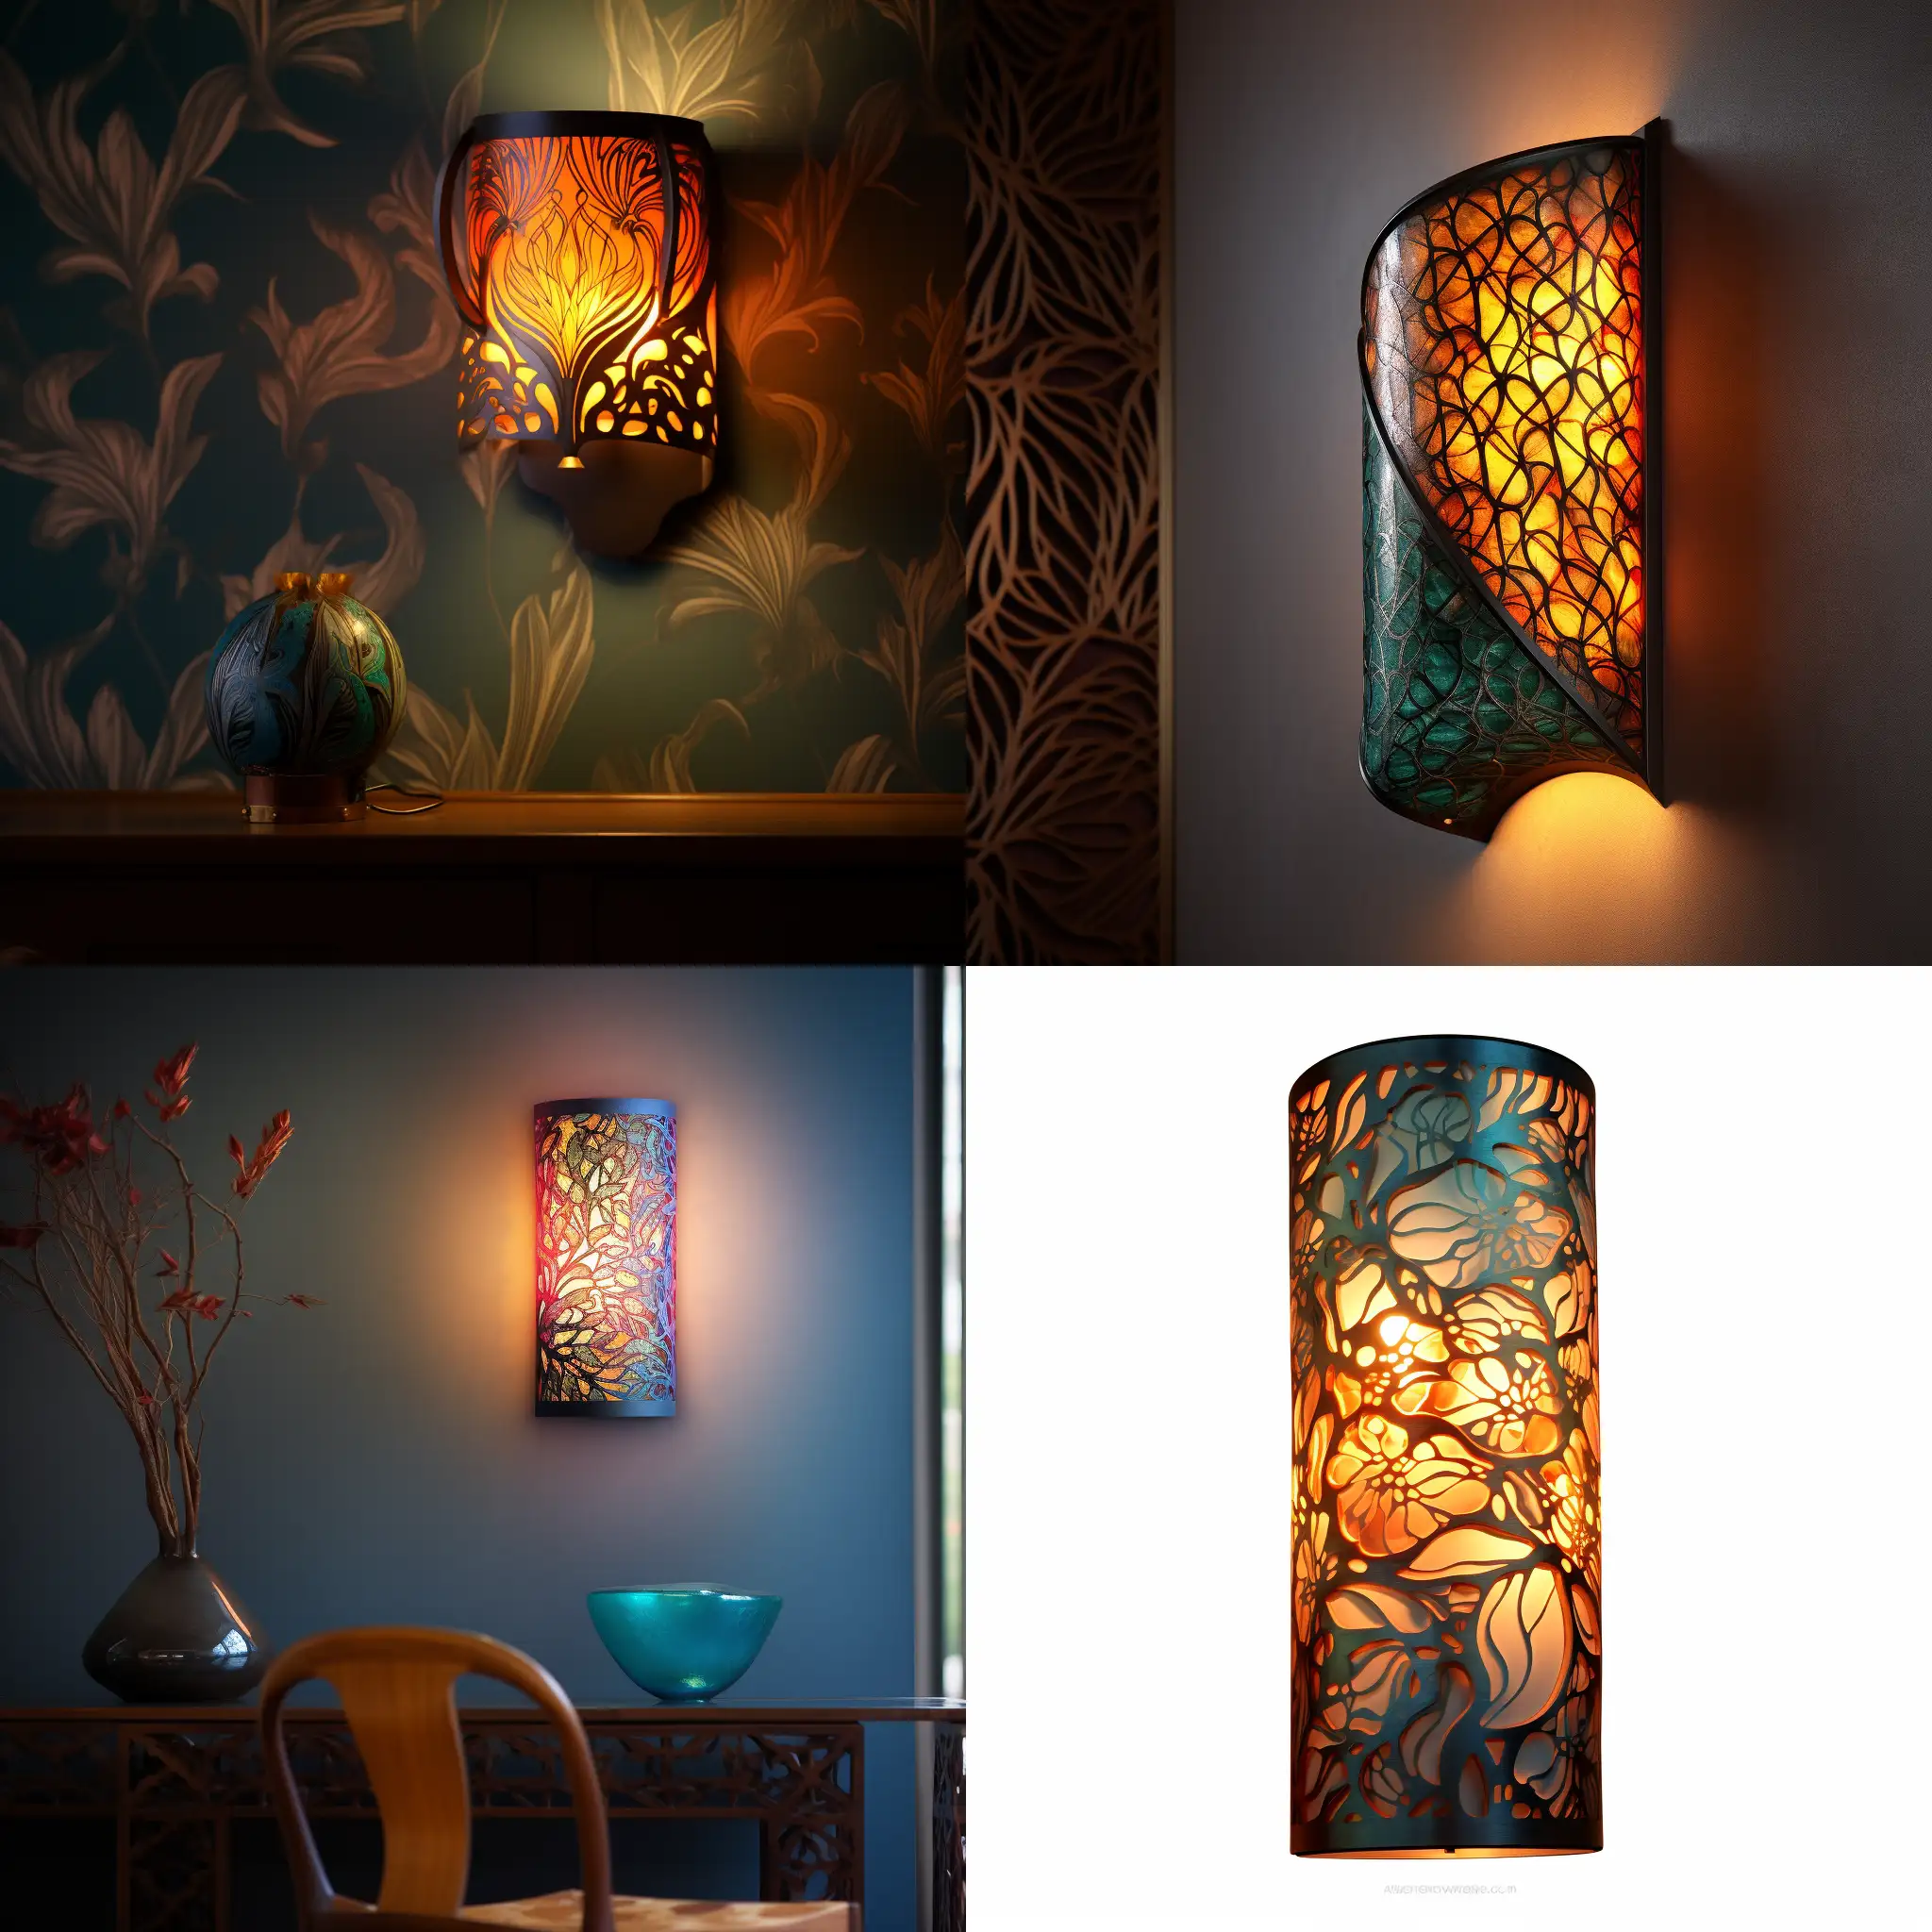 Intricate-Meshy-Wall-Light-Lamp-with-Lush-and-Realistic-Patterns